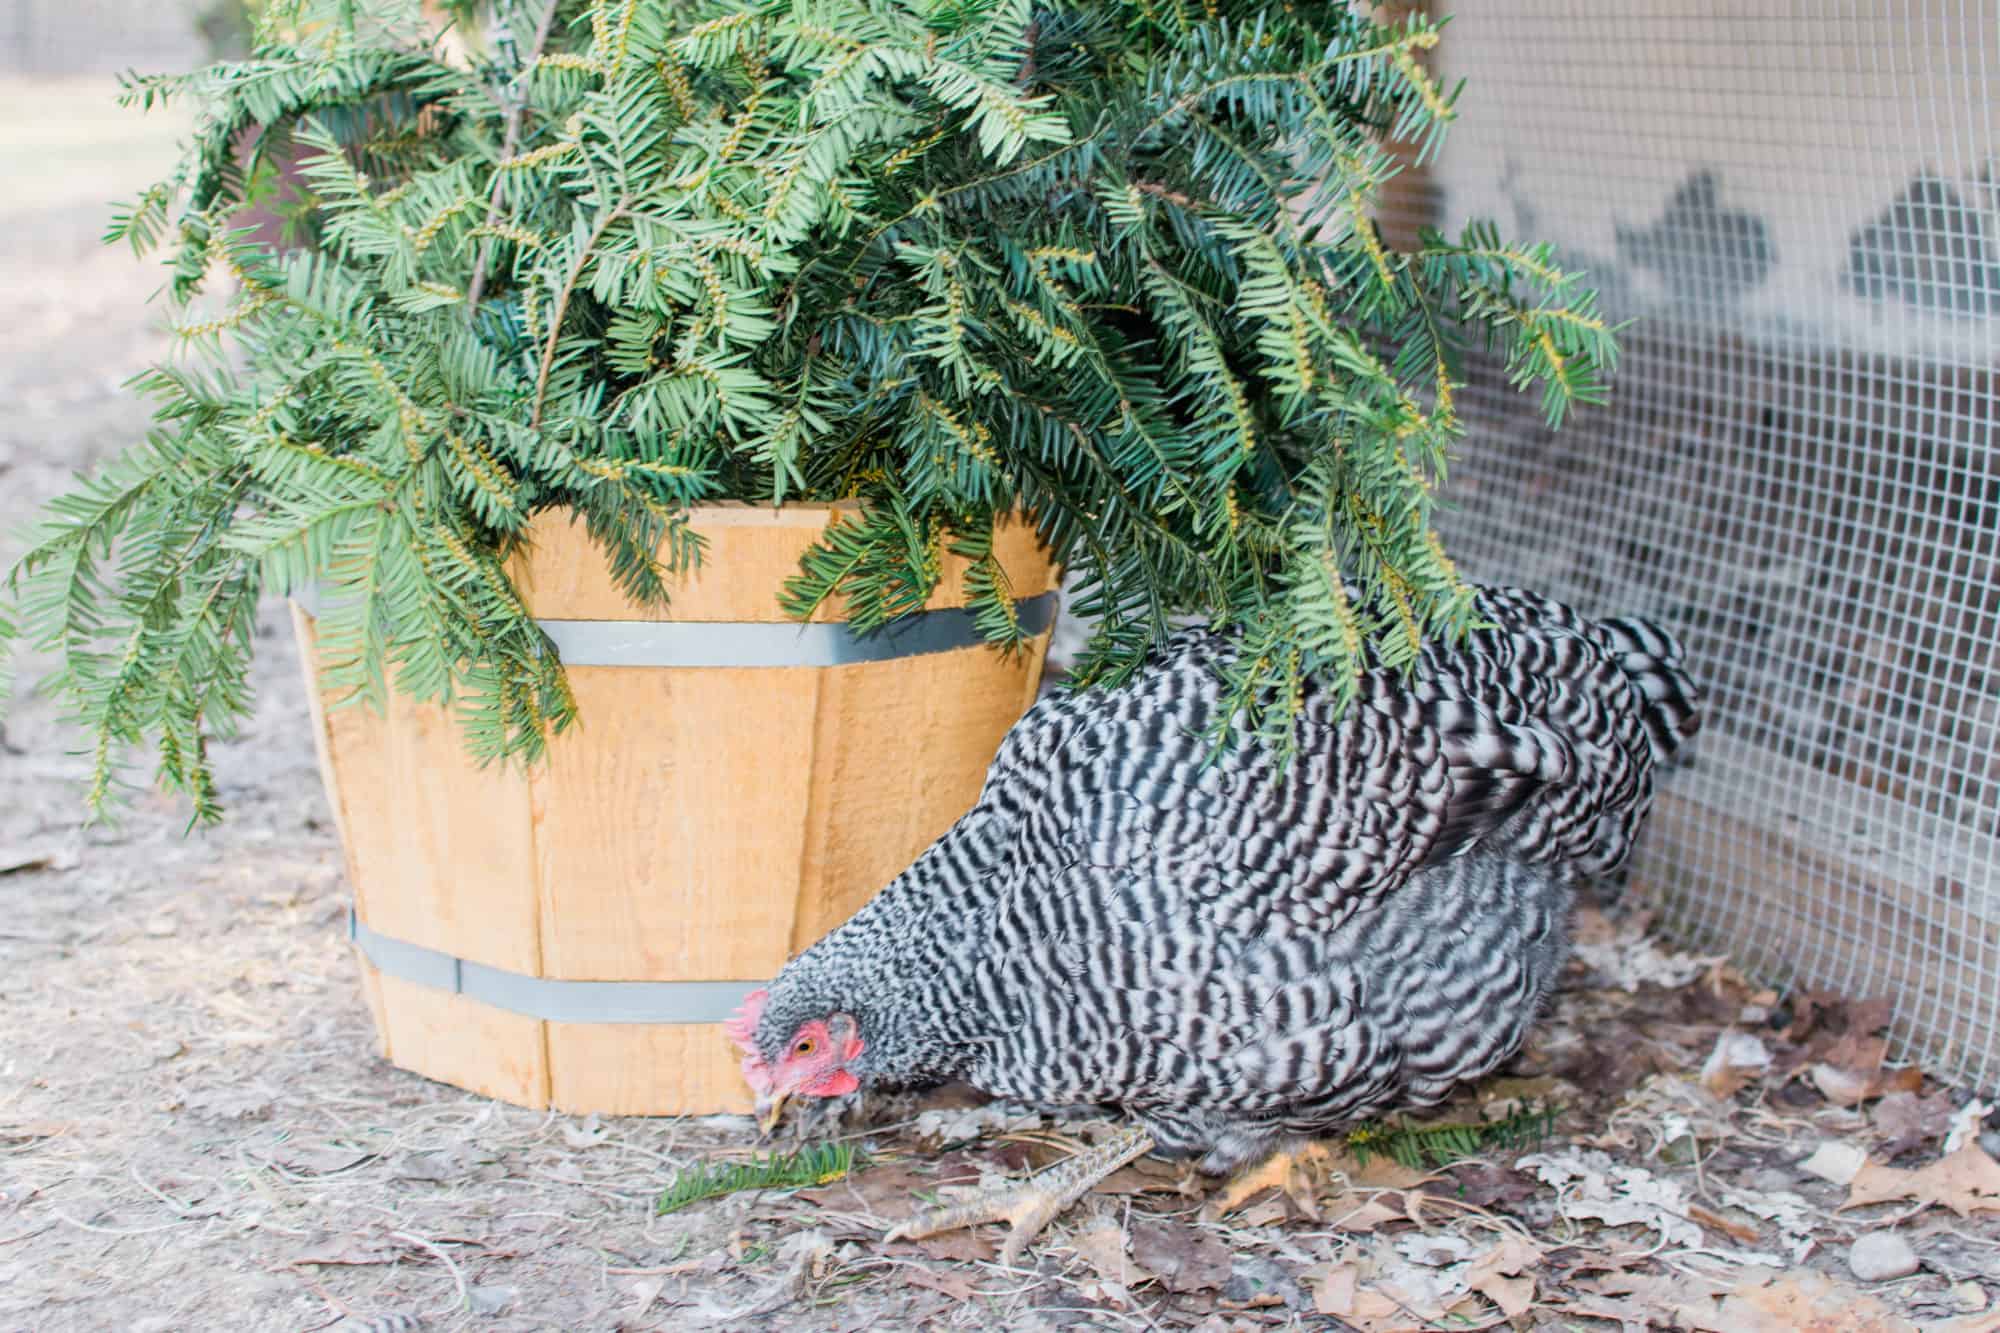 Chicken coop Christmas decorating ideas